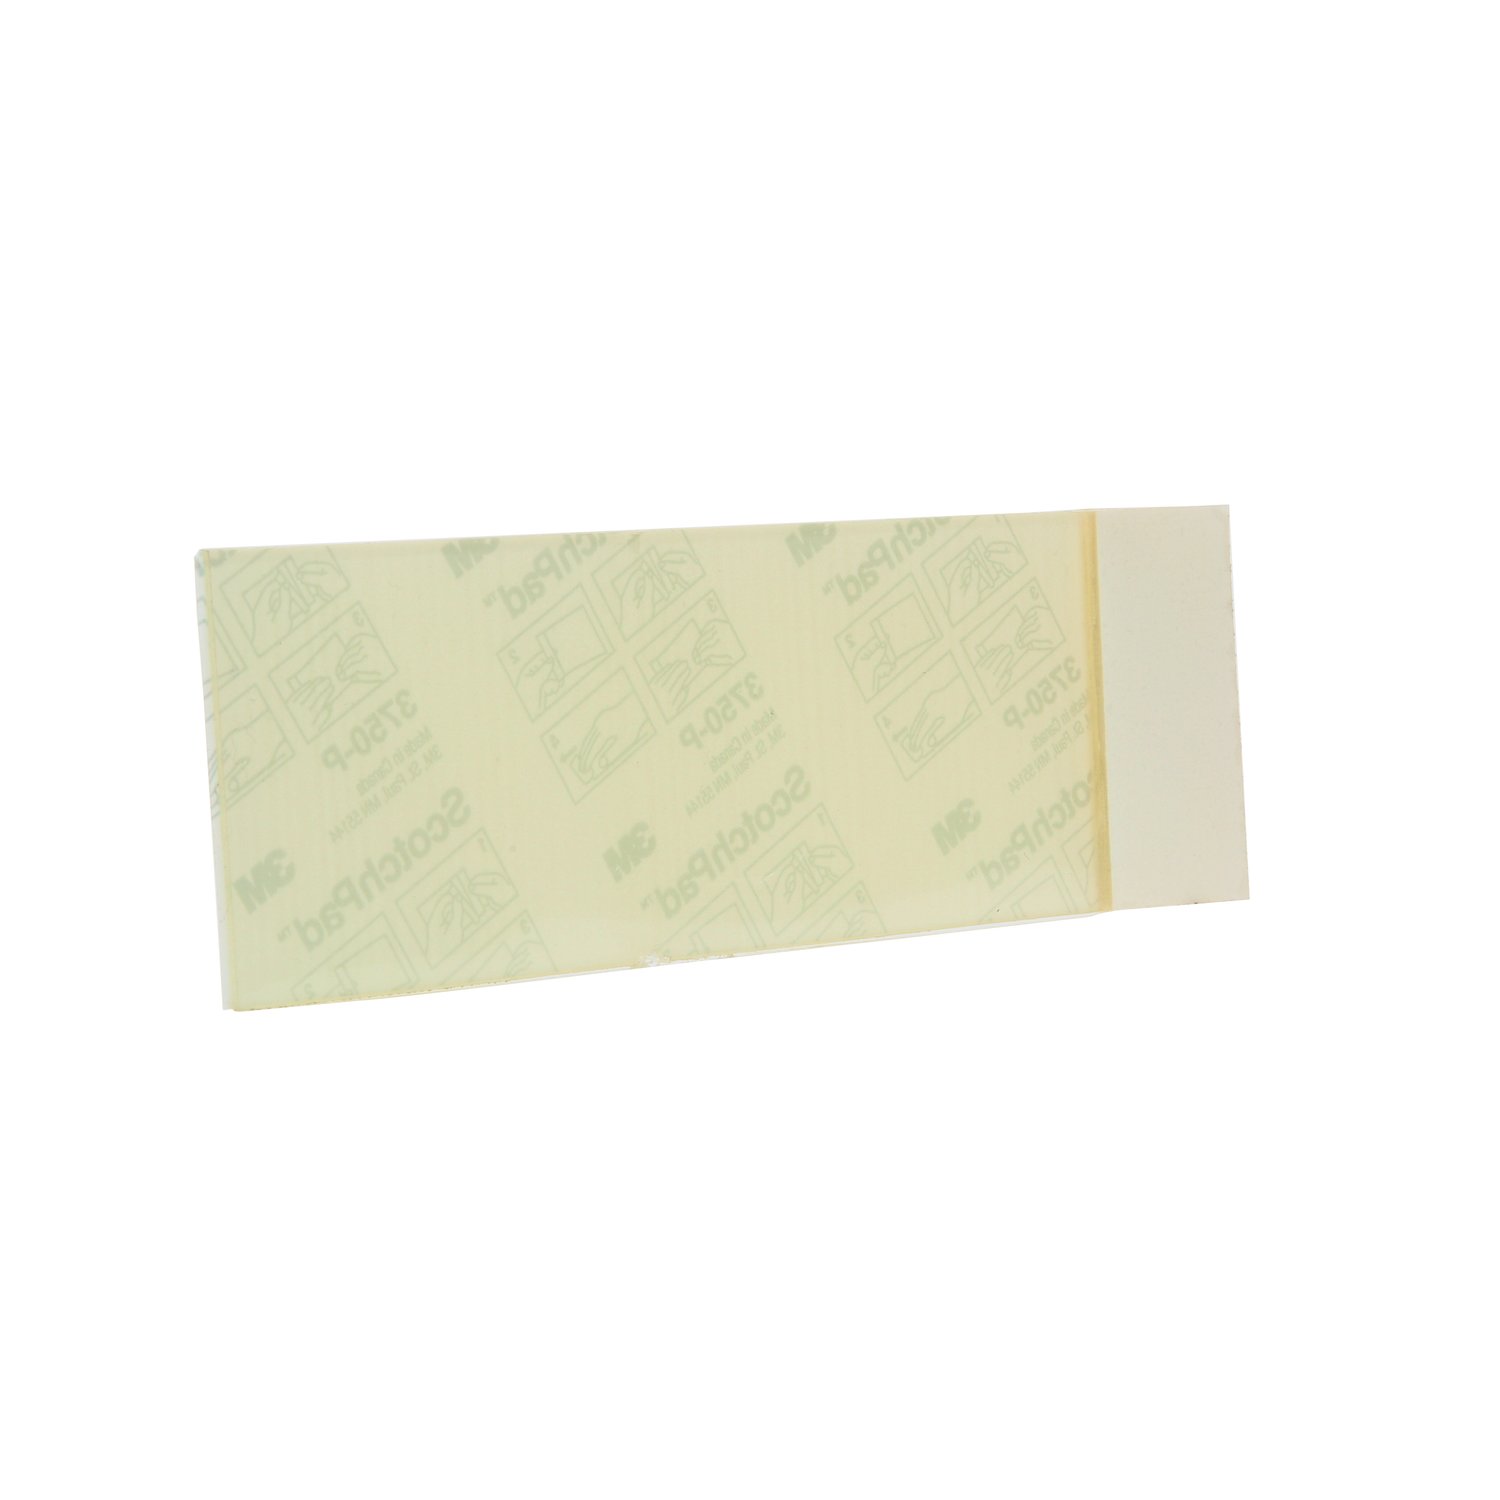 7010312542 - 3M Tape Sheets 3750P, Clear, 2 in x 6 in, 5 Pack/Case, Conveniently
Packaged